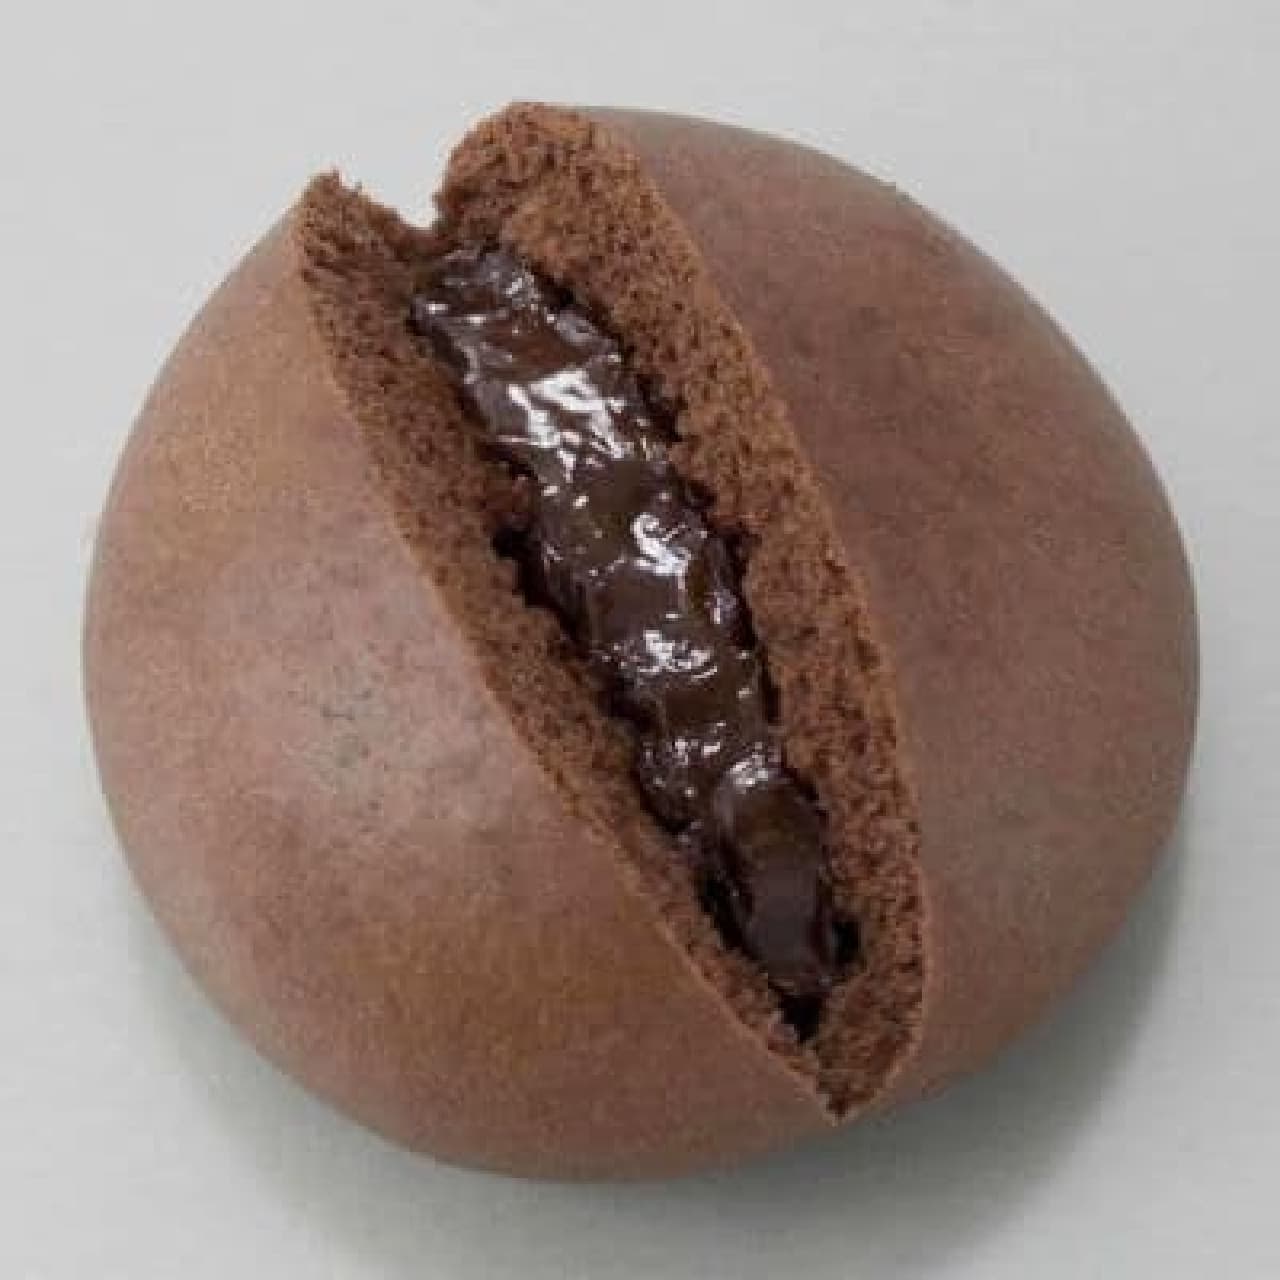 Rich chocolate bun with cacao scent